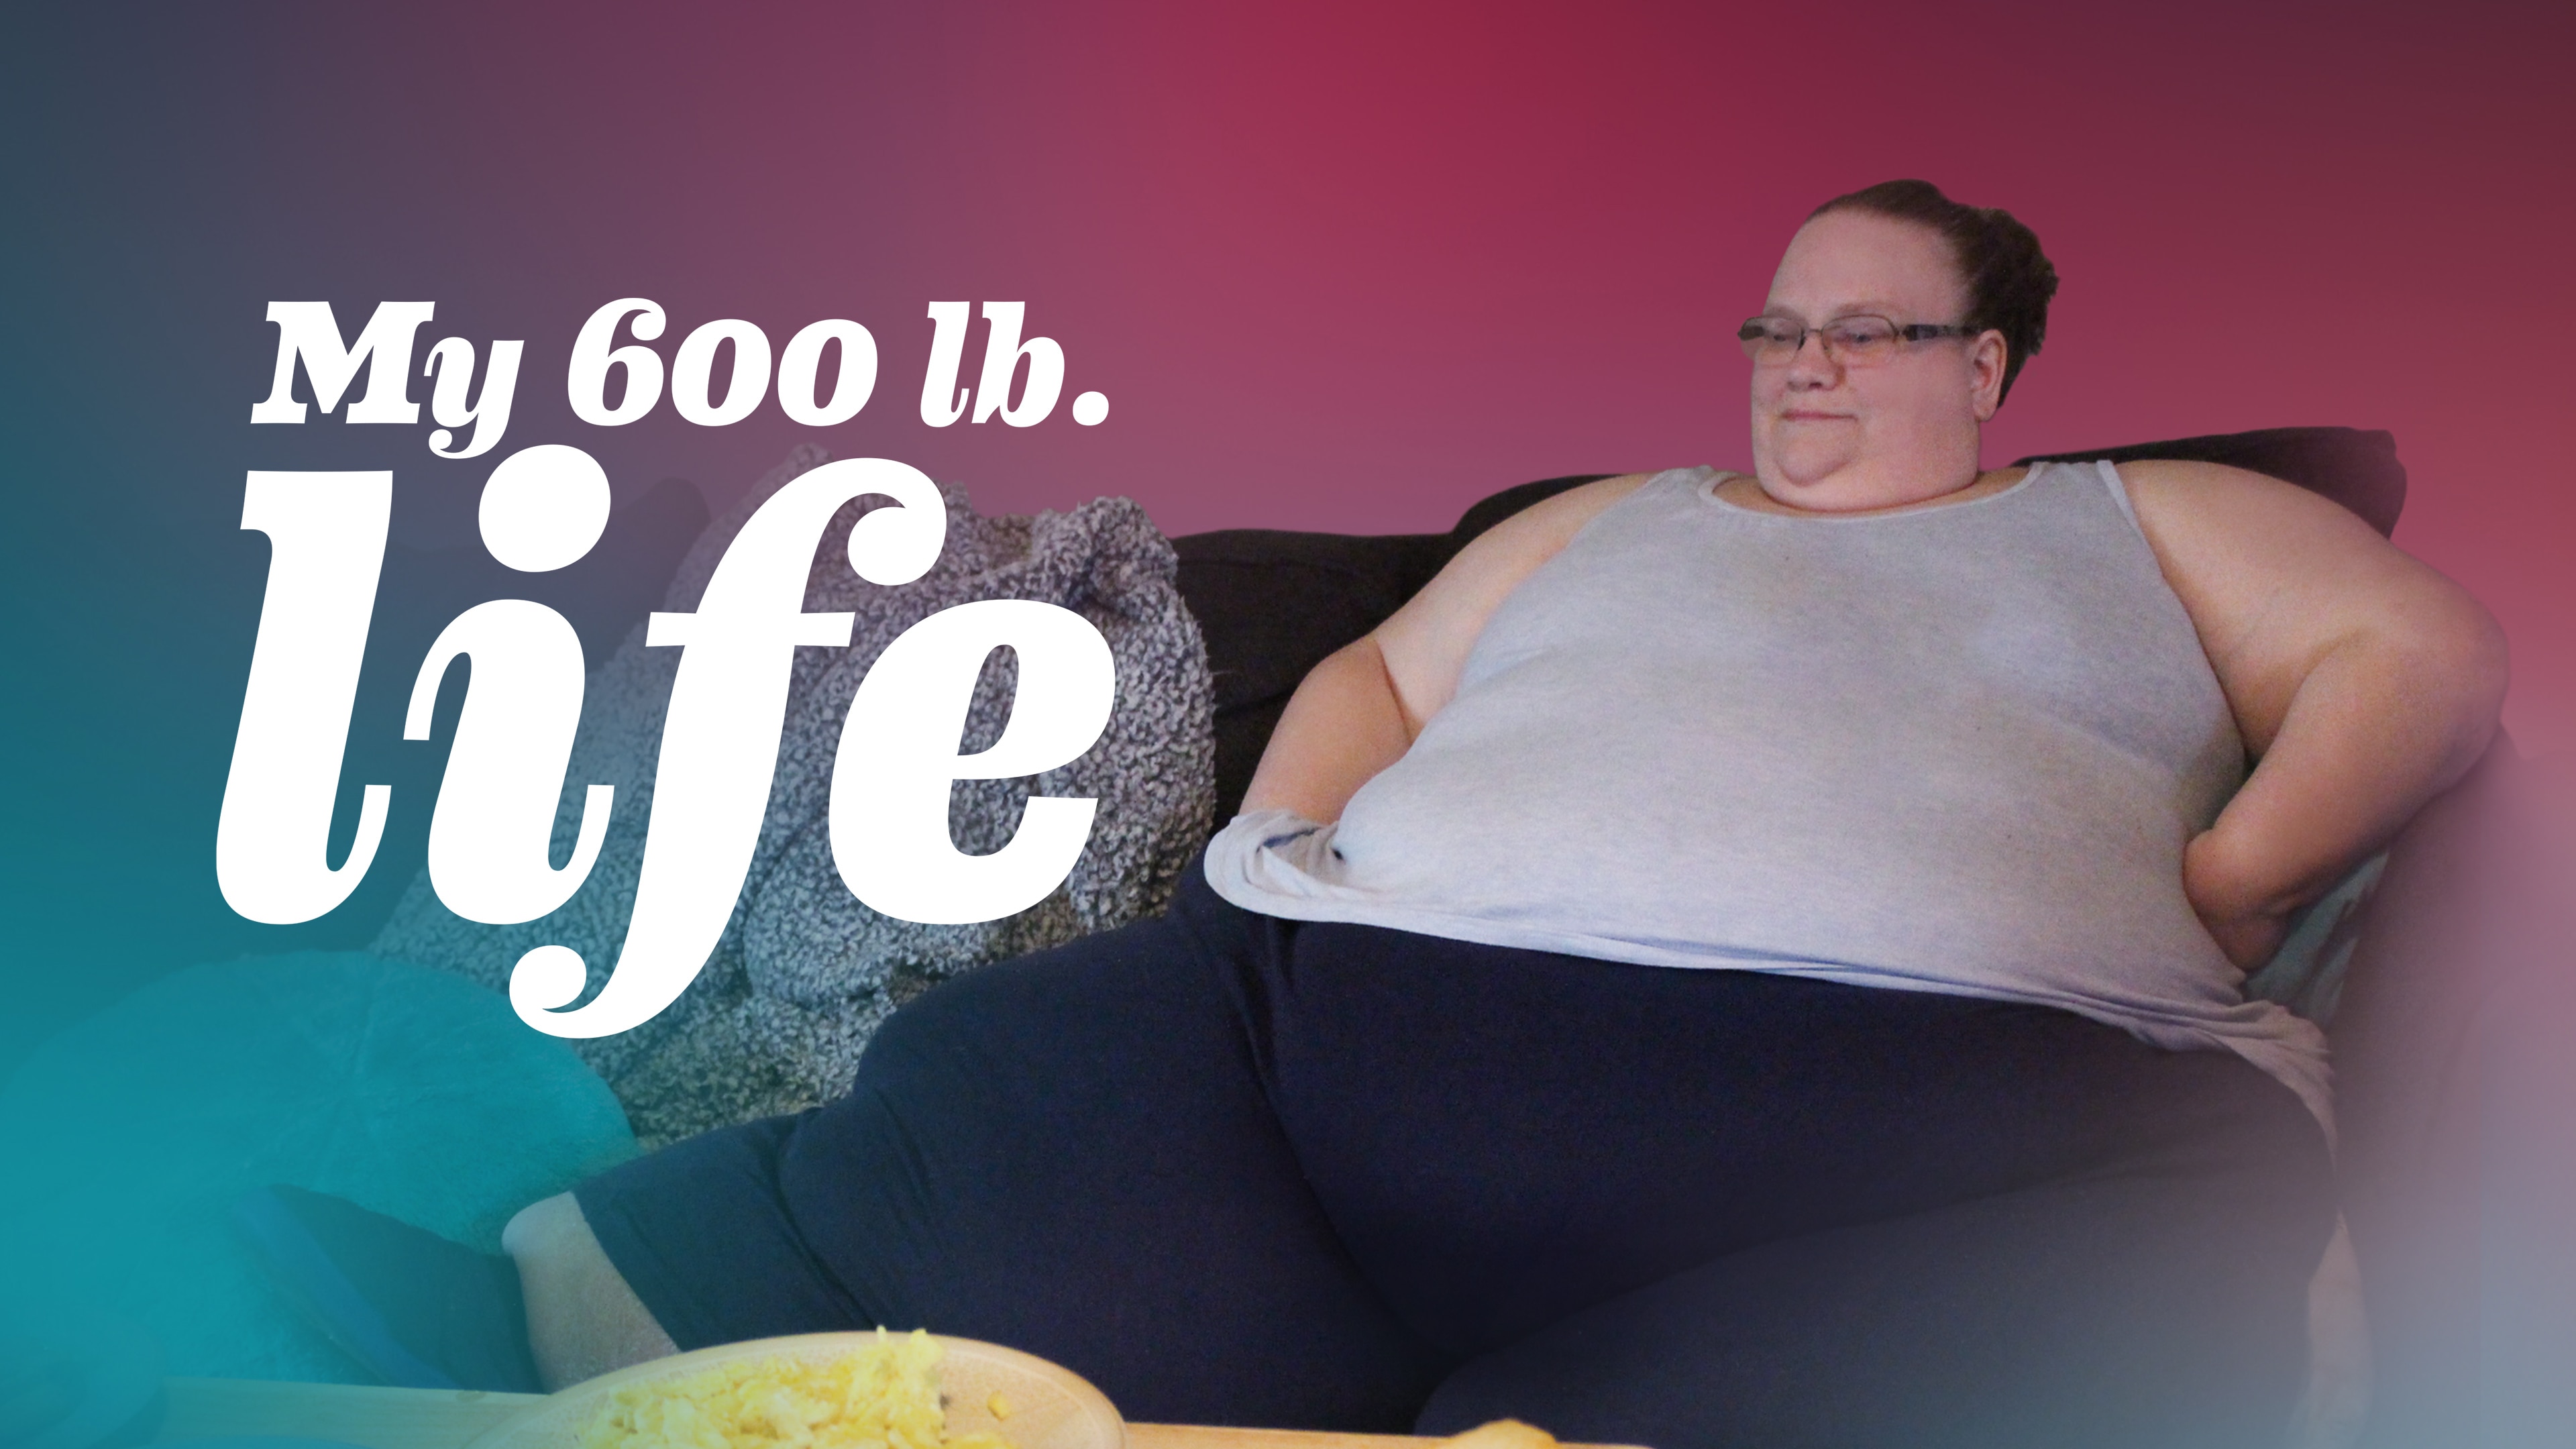 How This Woman Lost Over 400 Pounds—and Gained a New Inner Strength